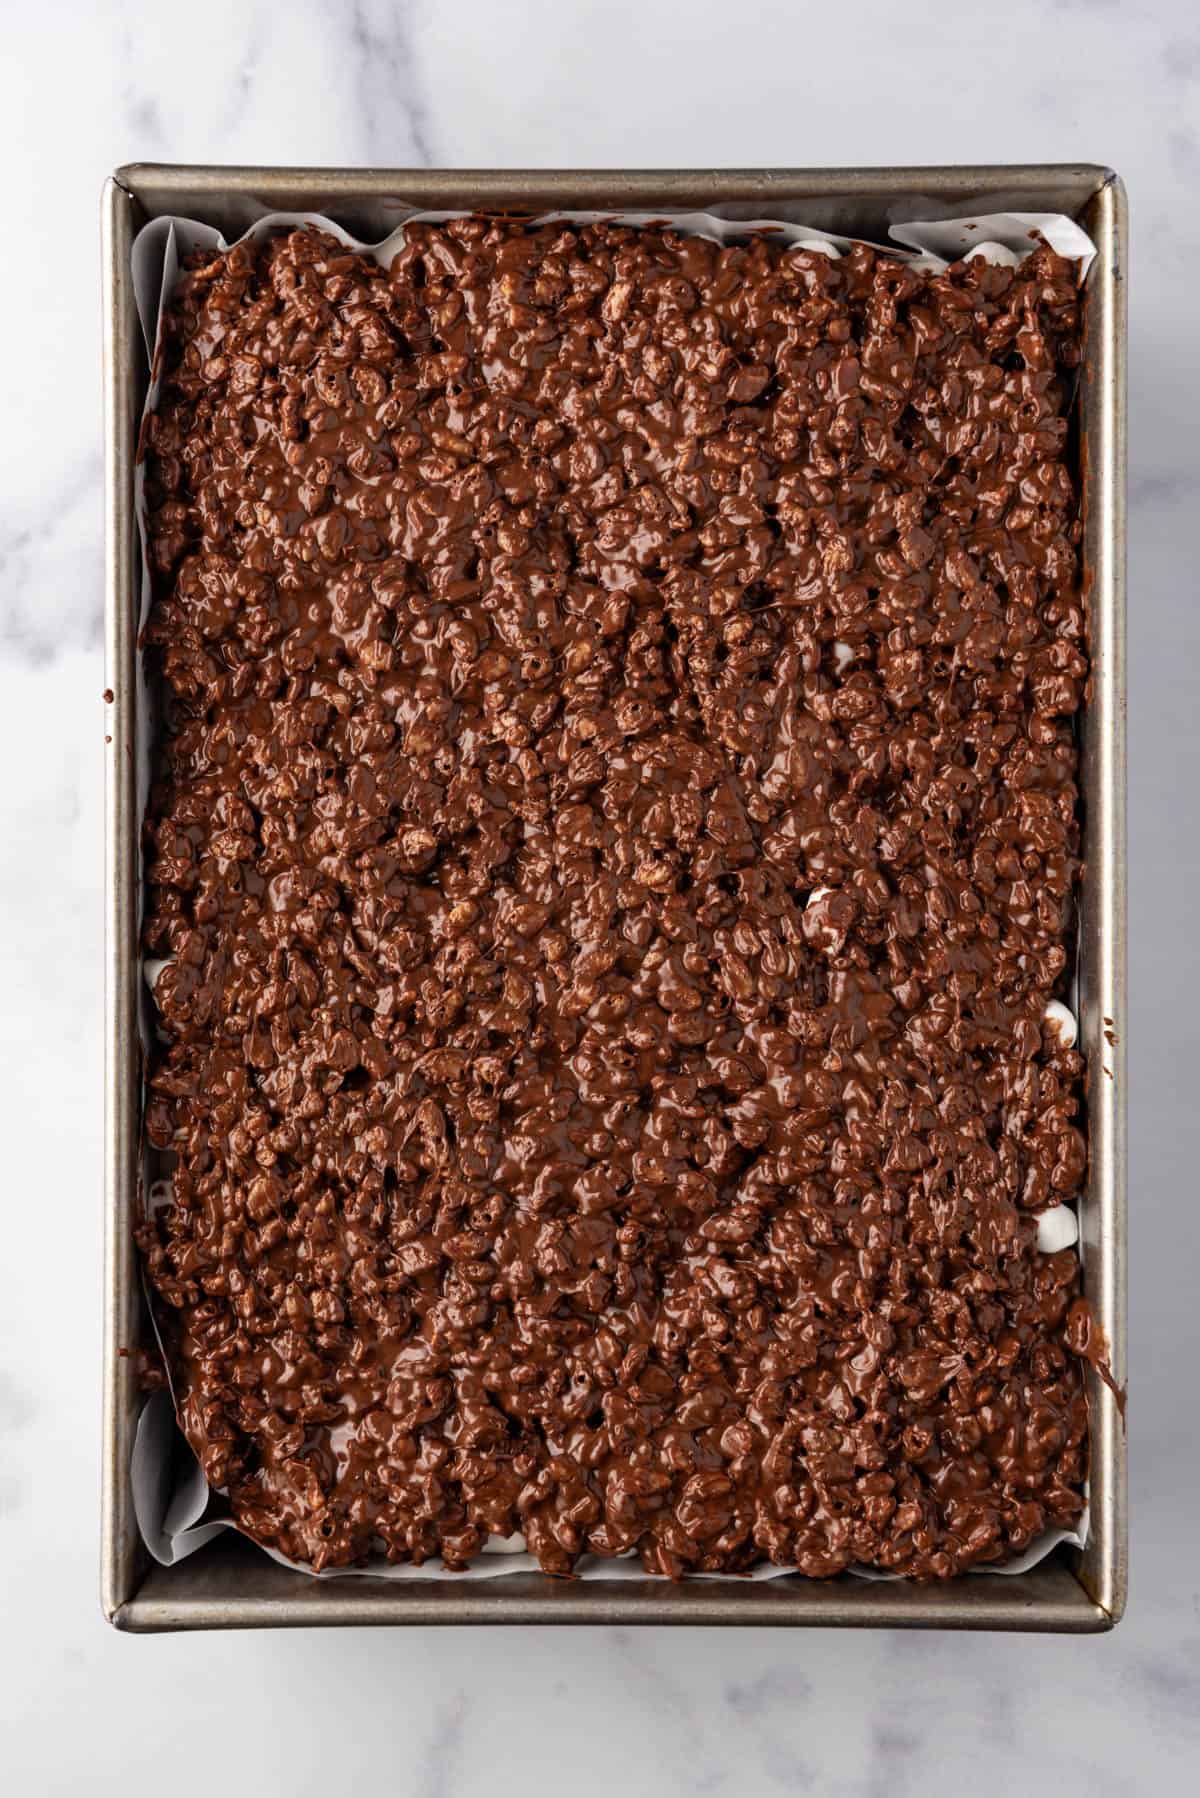 Spreading rice krispies, peanut butter, and chocolate mixture on top of brownies in a pan.